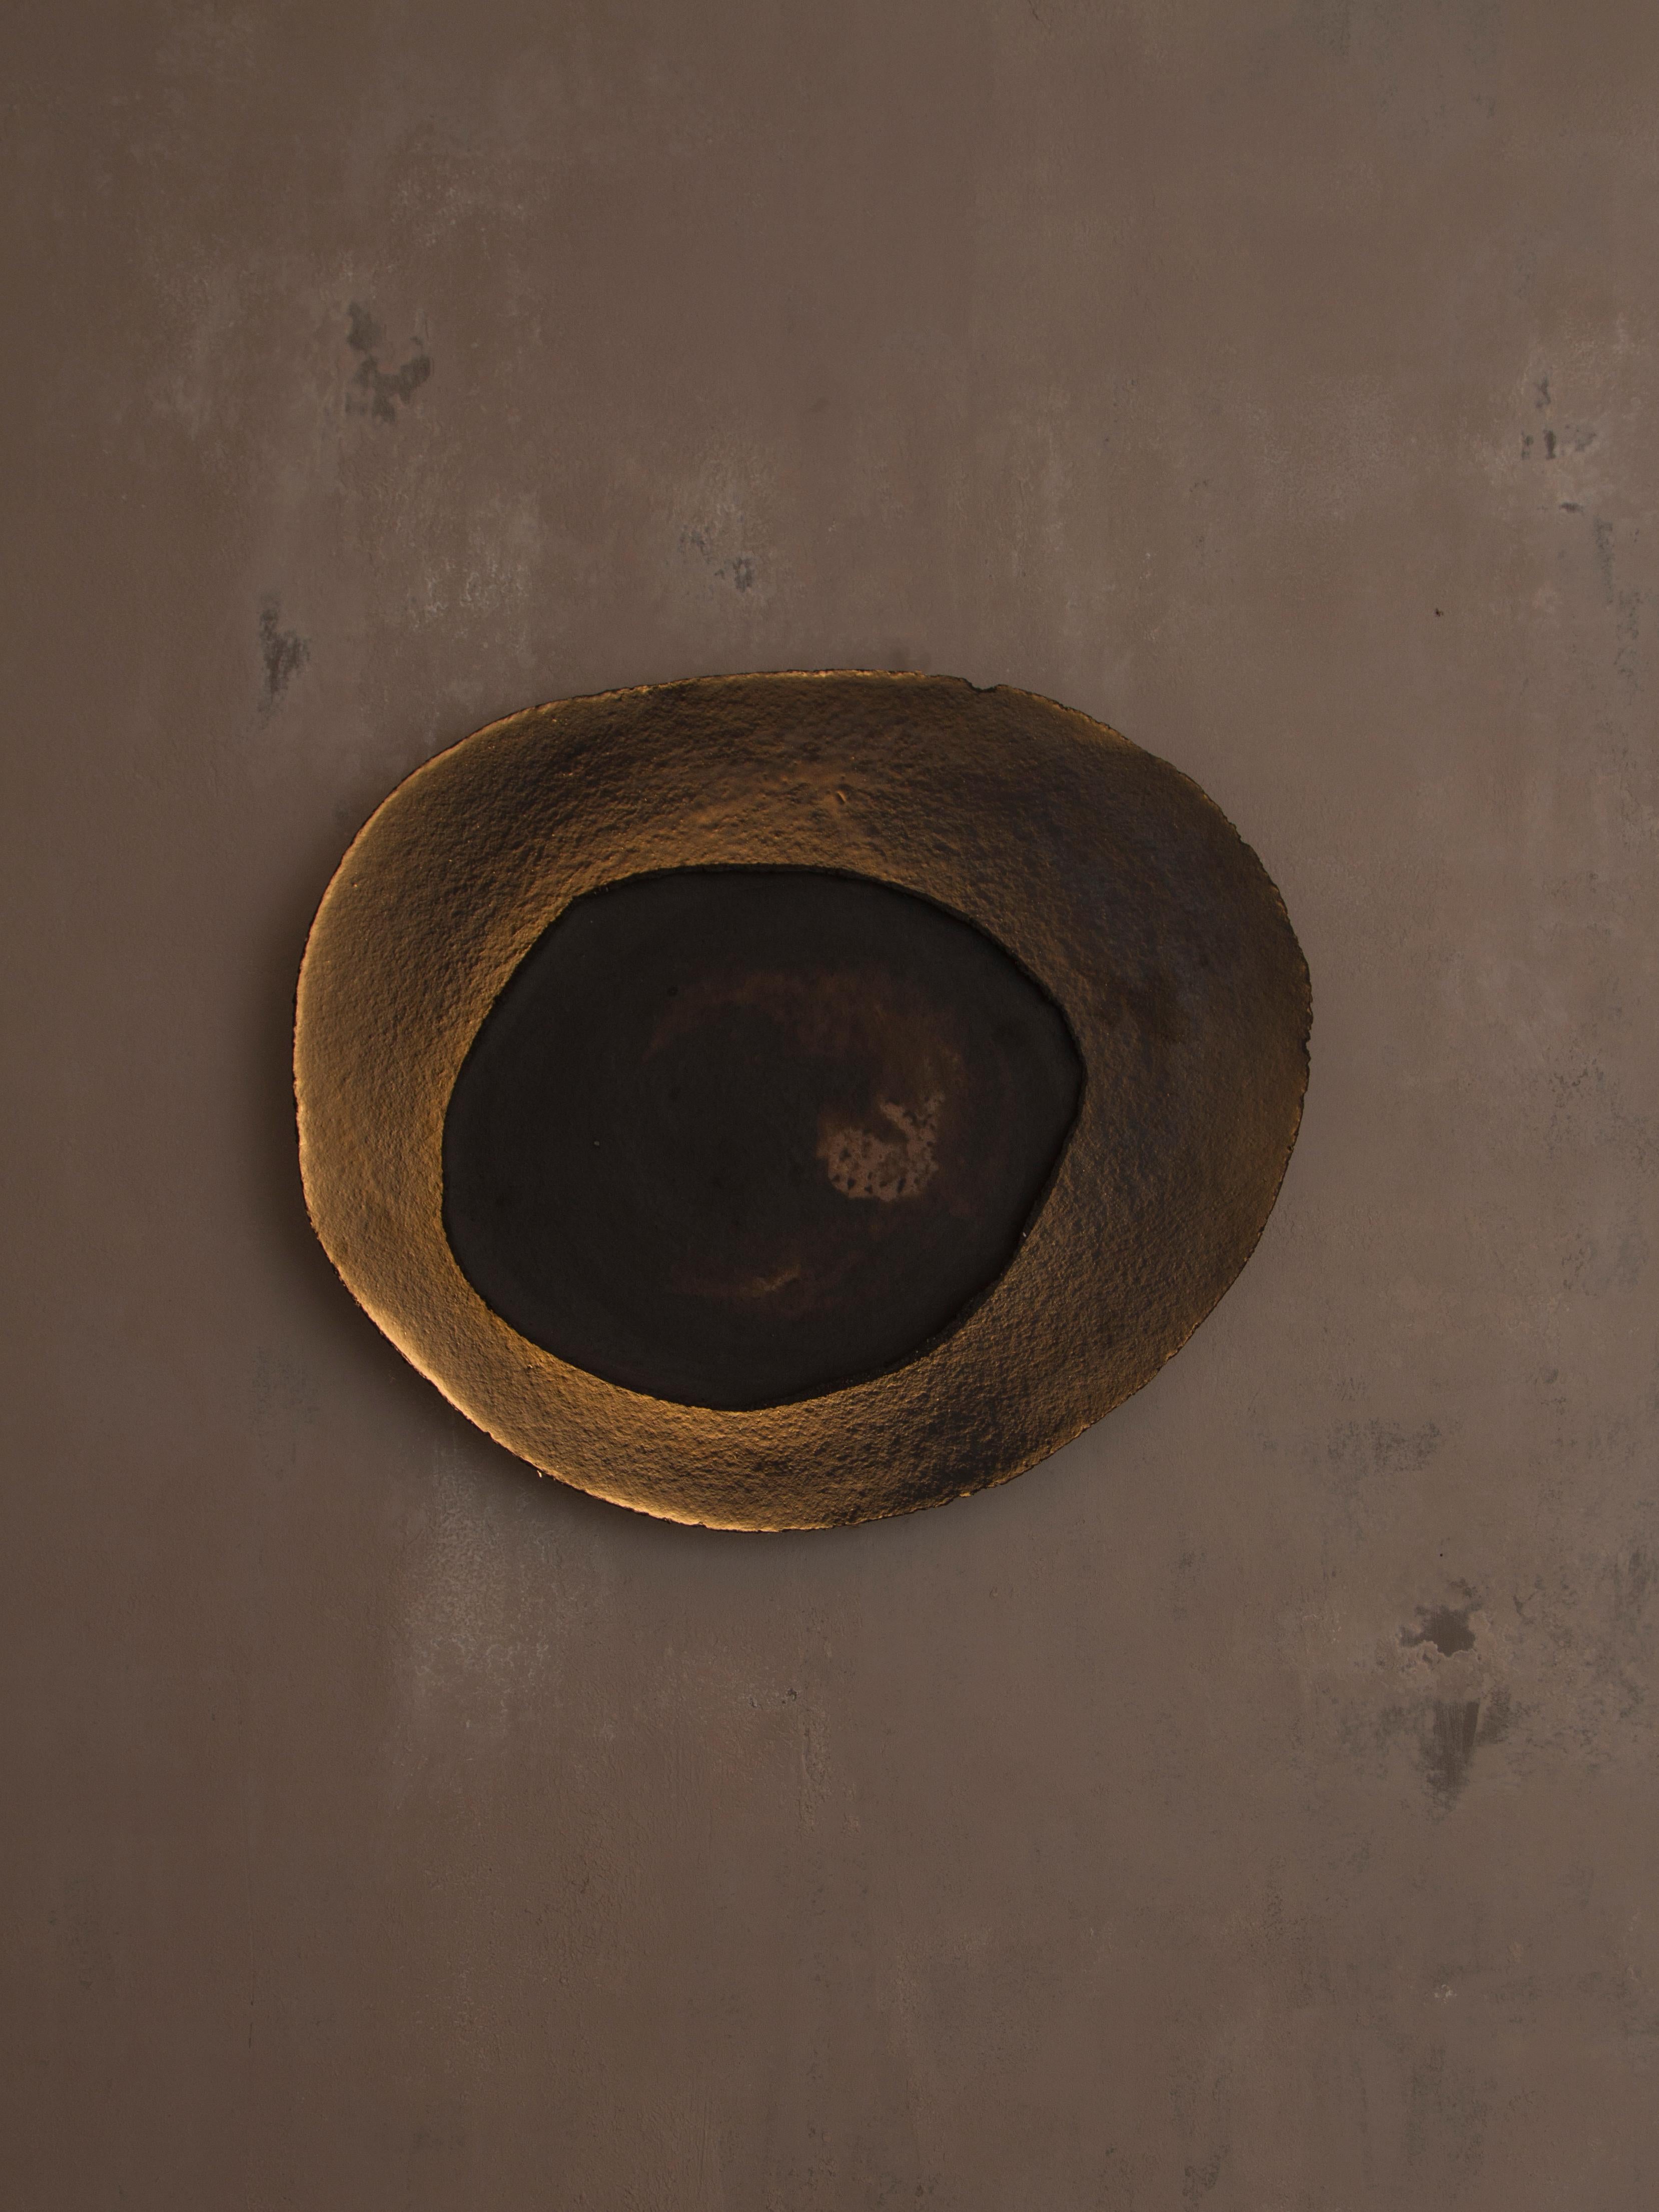 Ash #6 wall light by Margaux Leycuras
One of a Kind, Signed and numbered
Dimensions: D 6 x W 56 x H 47 cm 
Material: Ceramic, black stoneware with patinated gold enamel.
The piece is signed, numbered and delivered with a certificate of